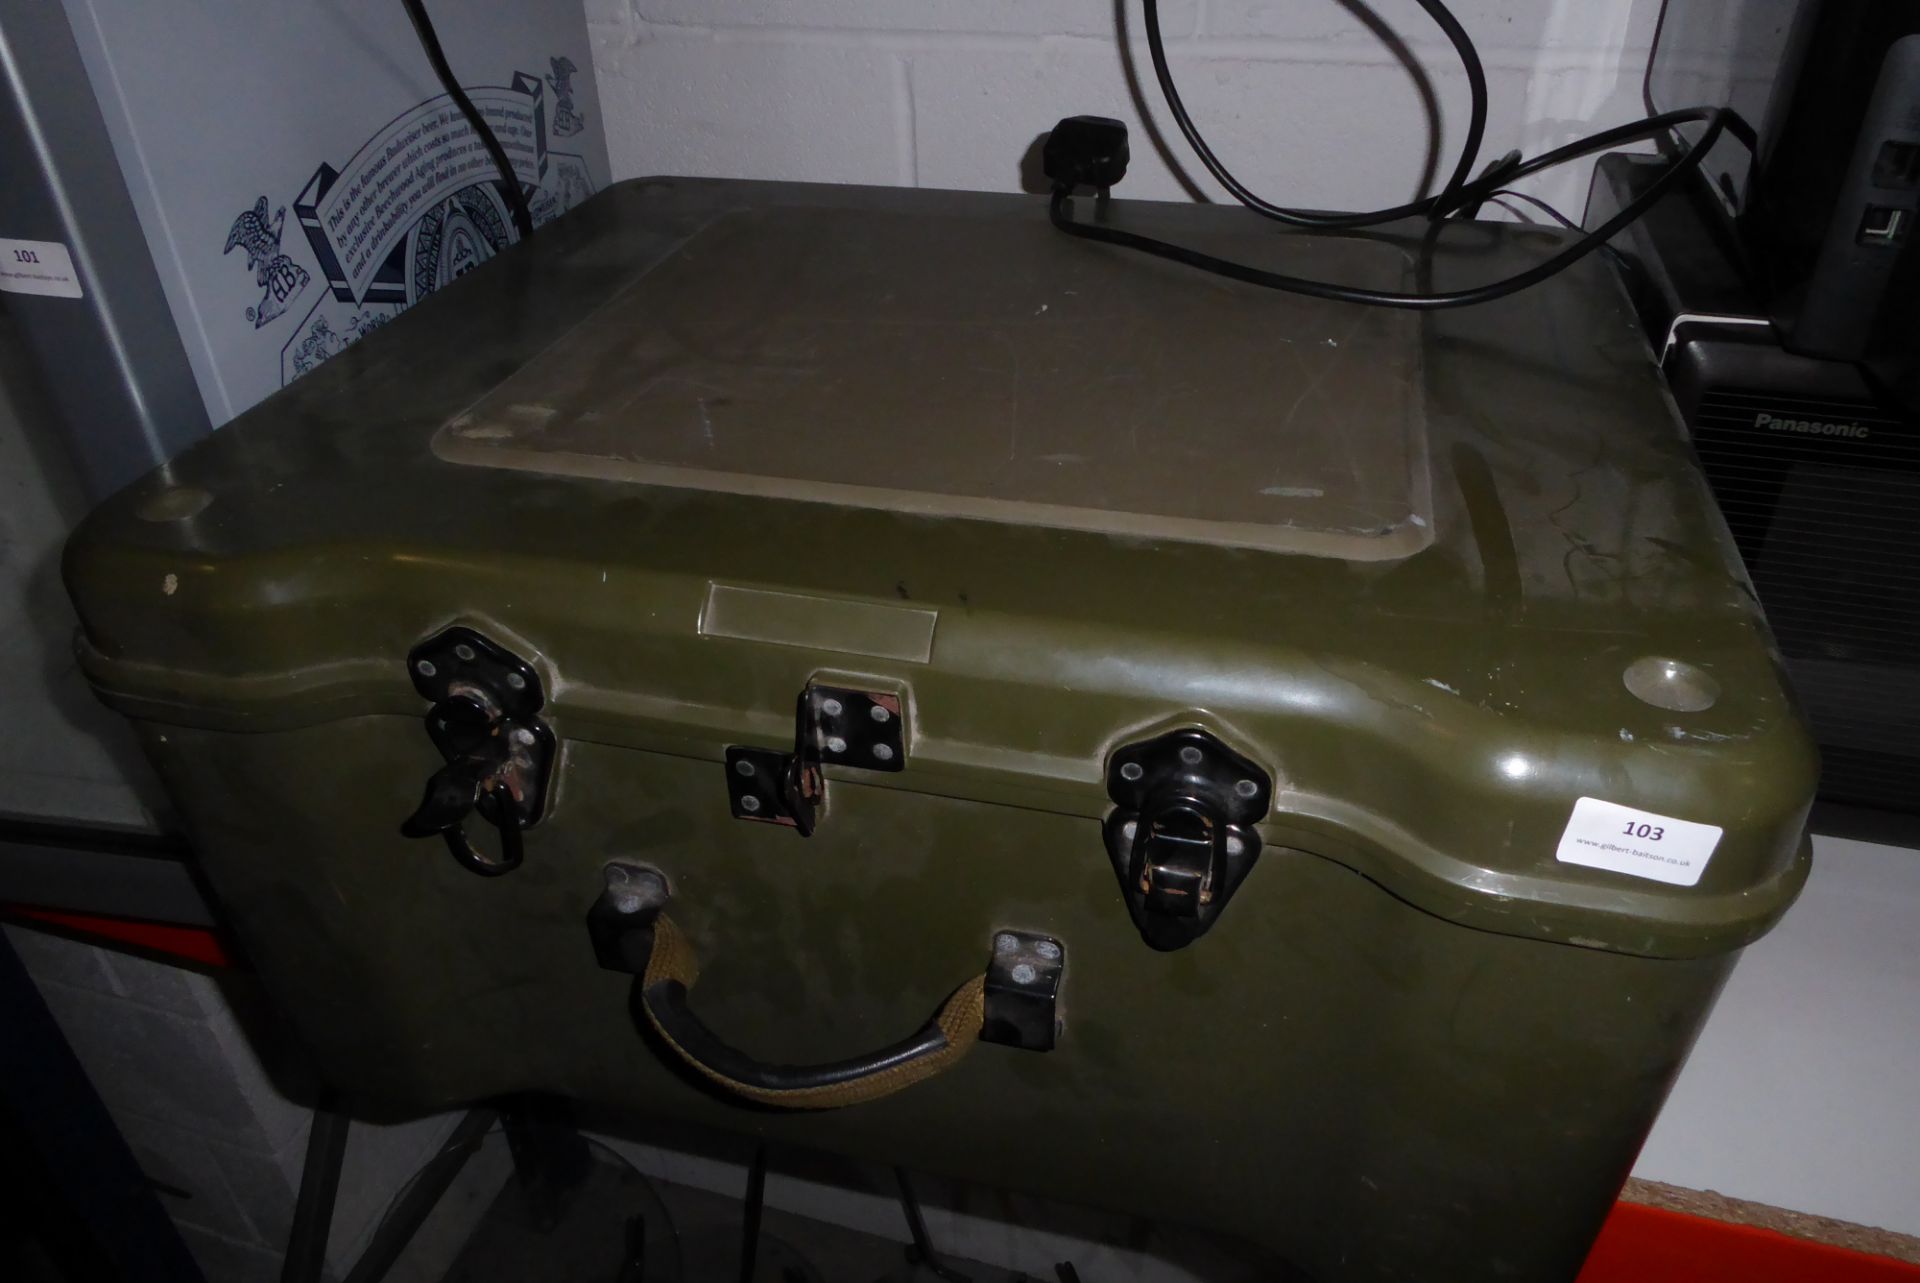 * 1x very cool army style packing case. 600x500x300